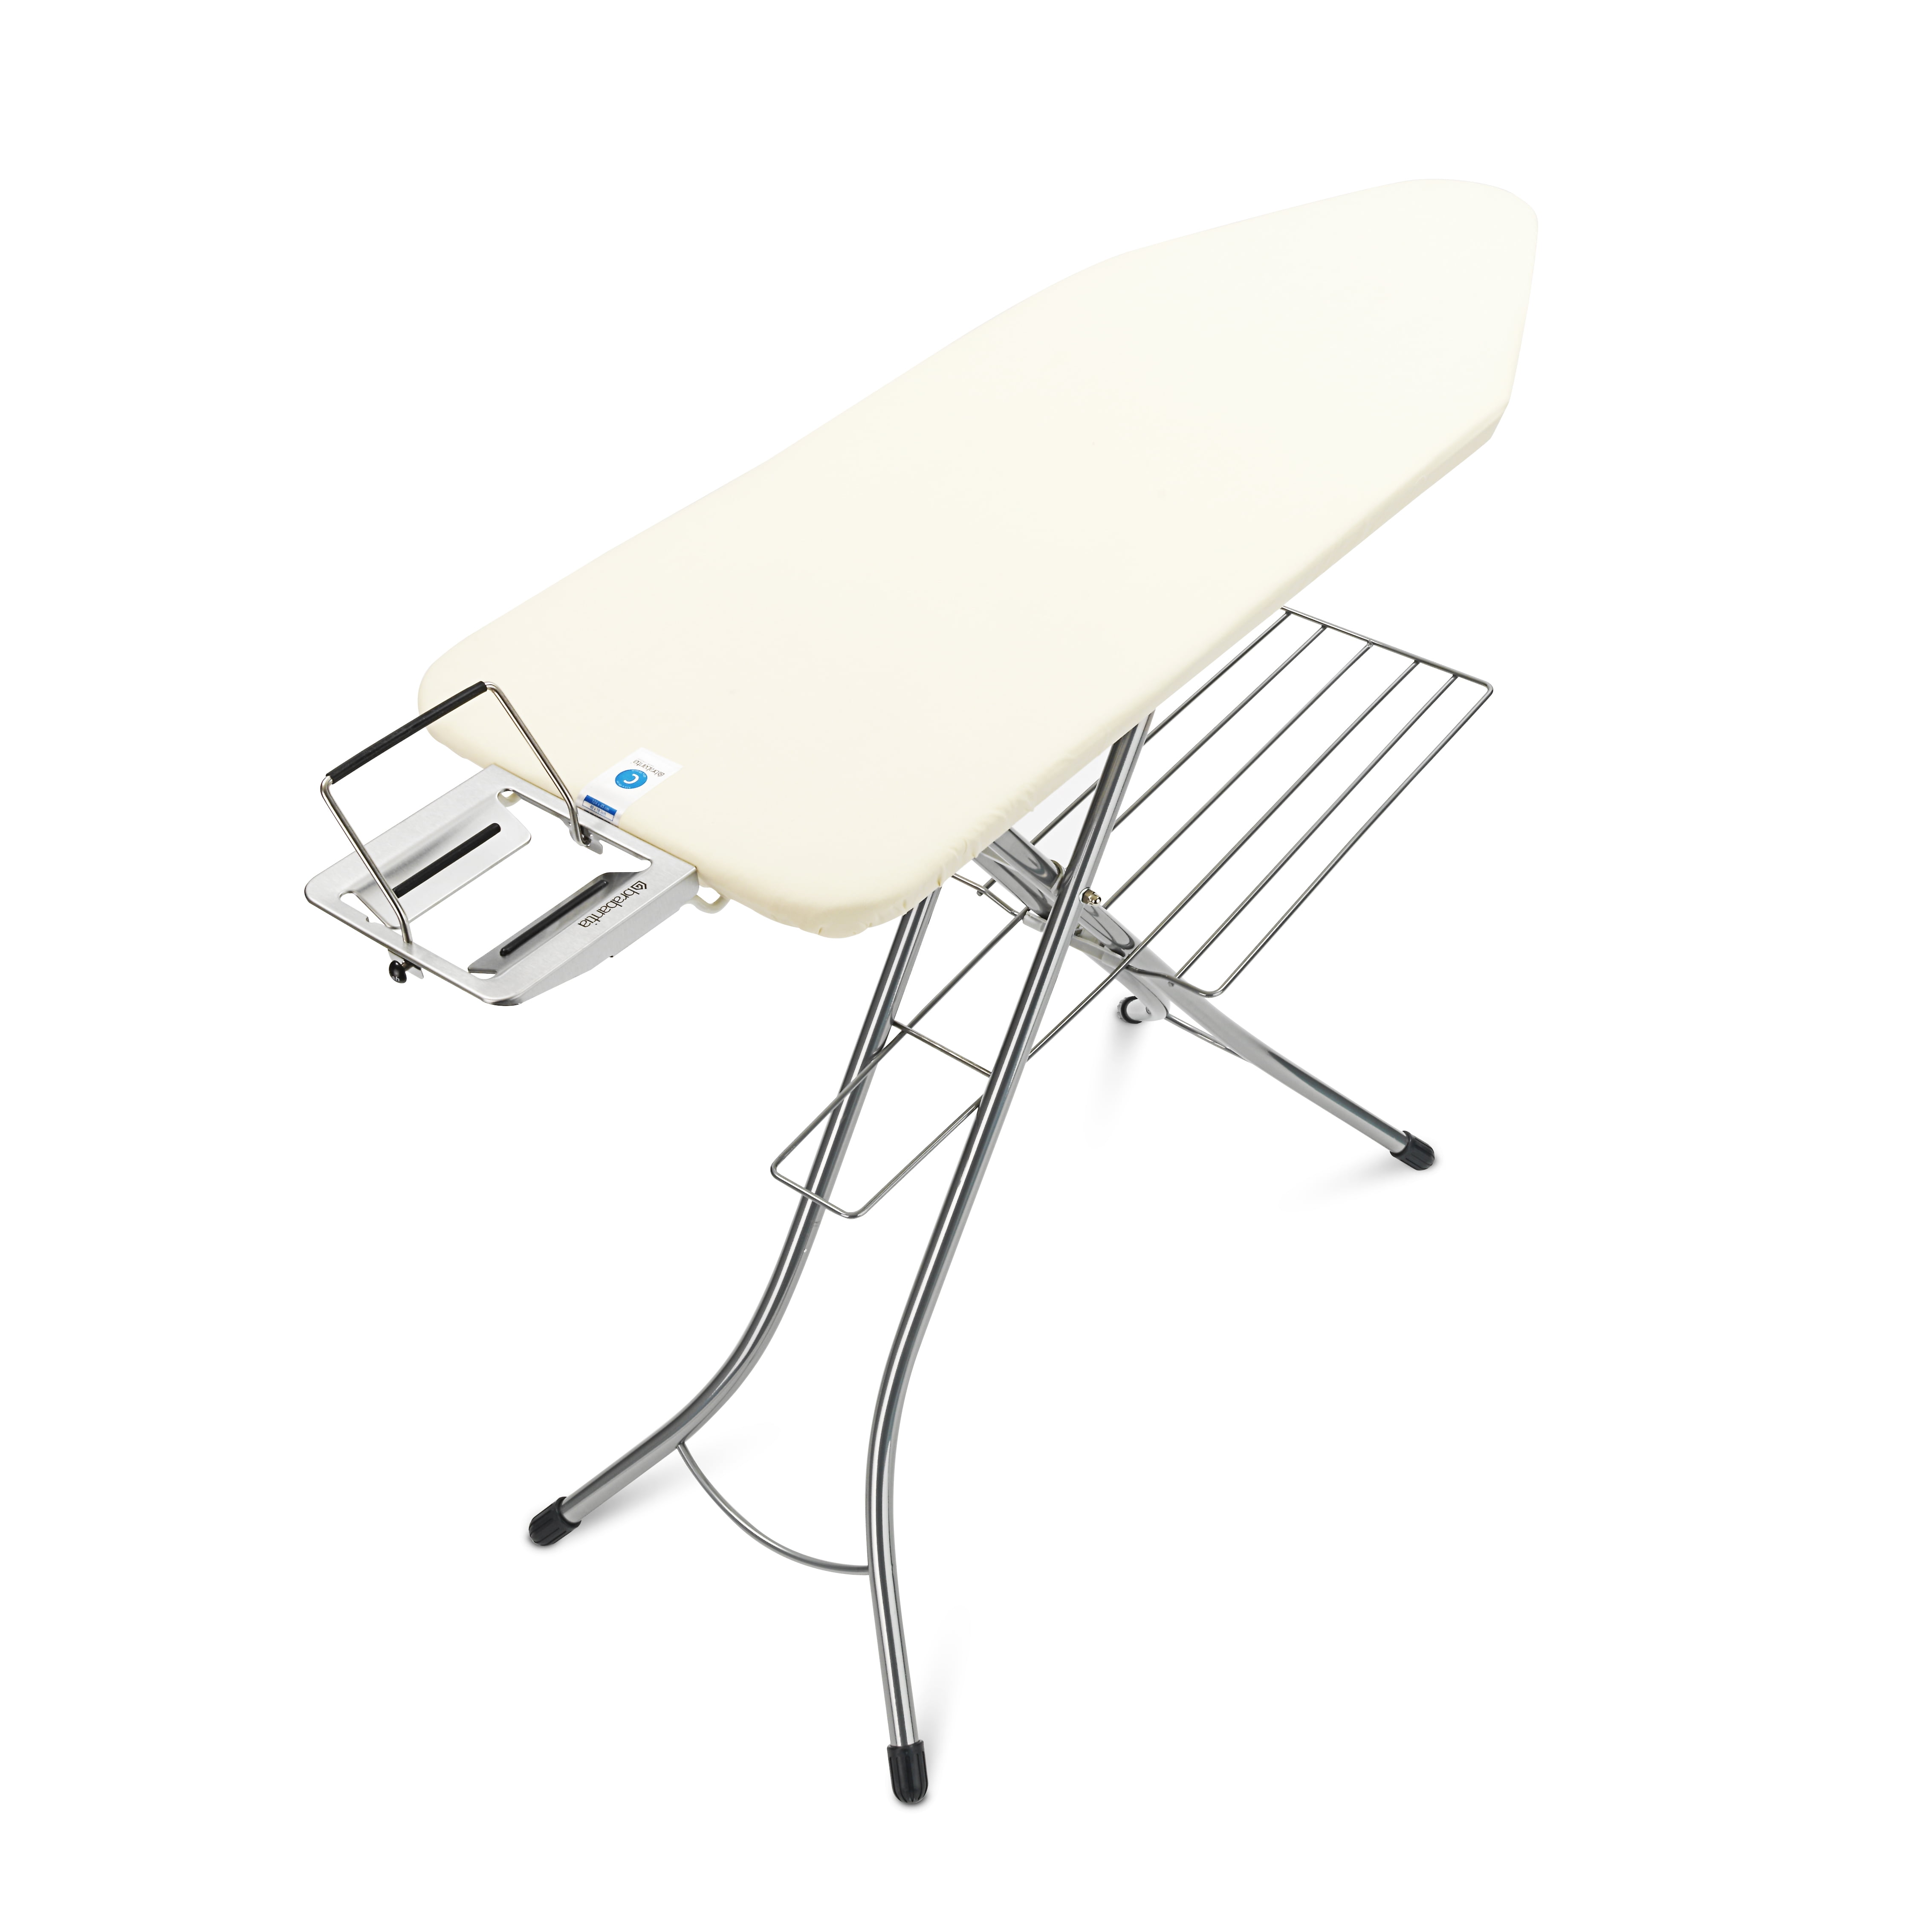 124 x 45 cm x 18 in. Ironing Board C with Solid Steam Unit Holder 49 in 